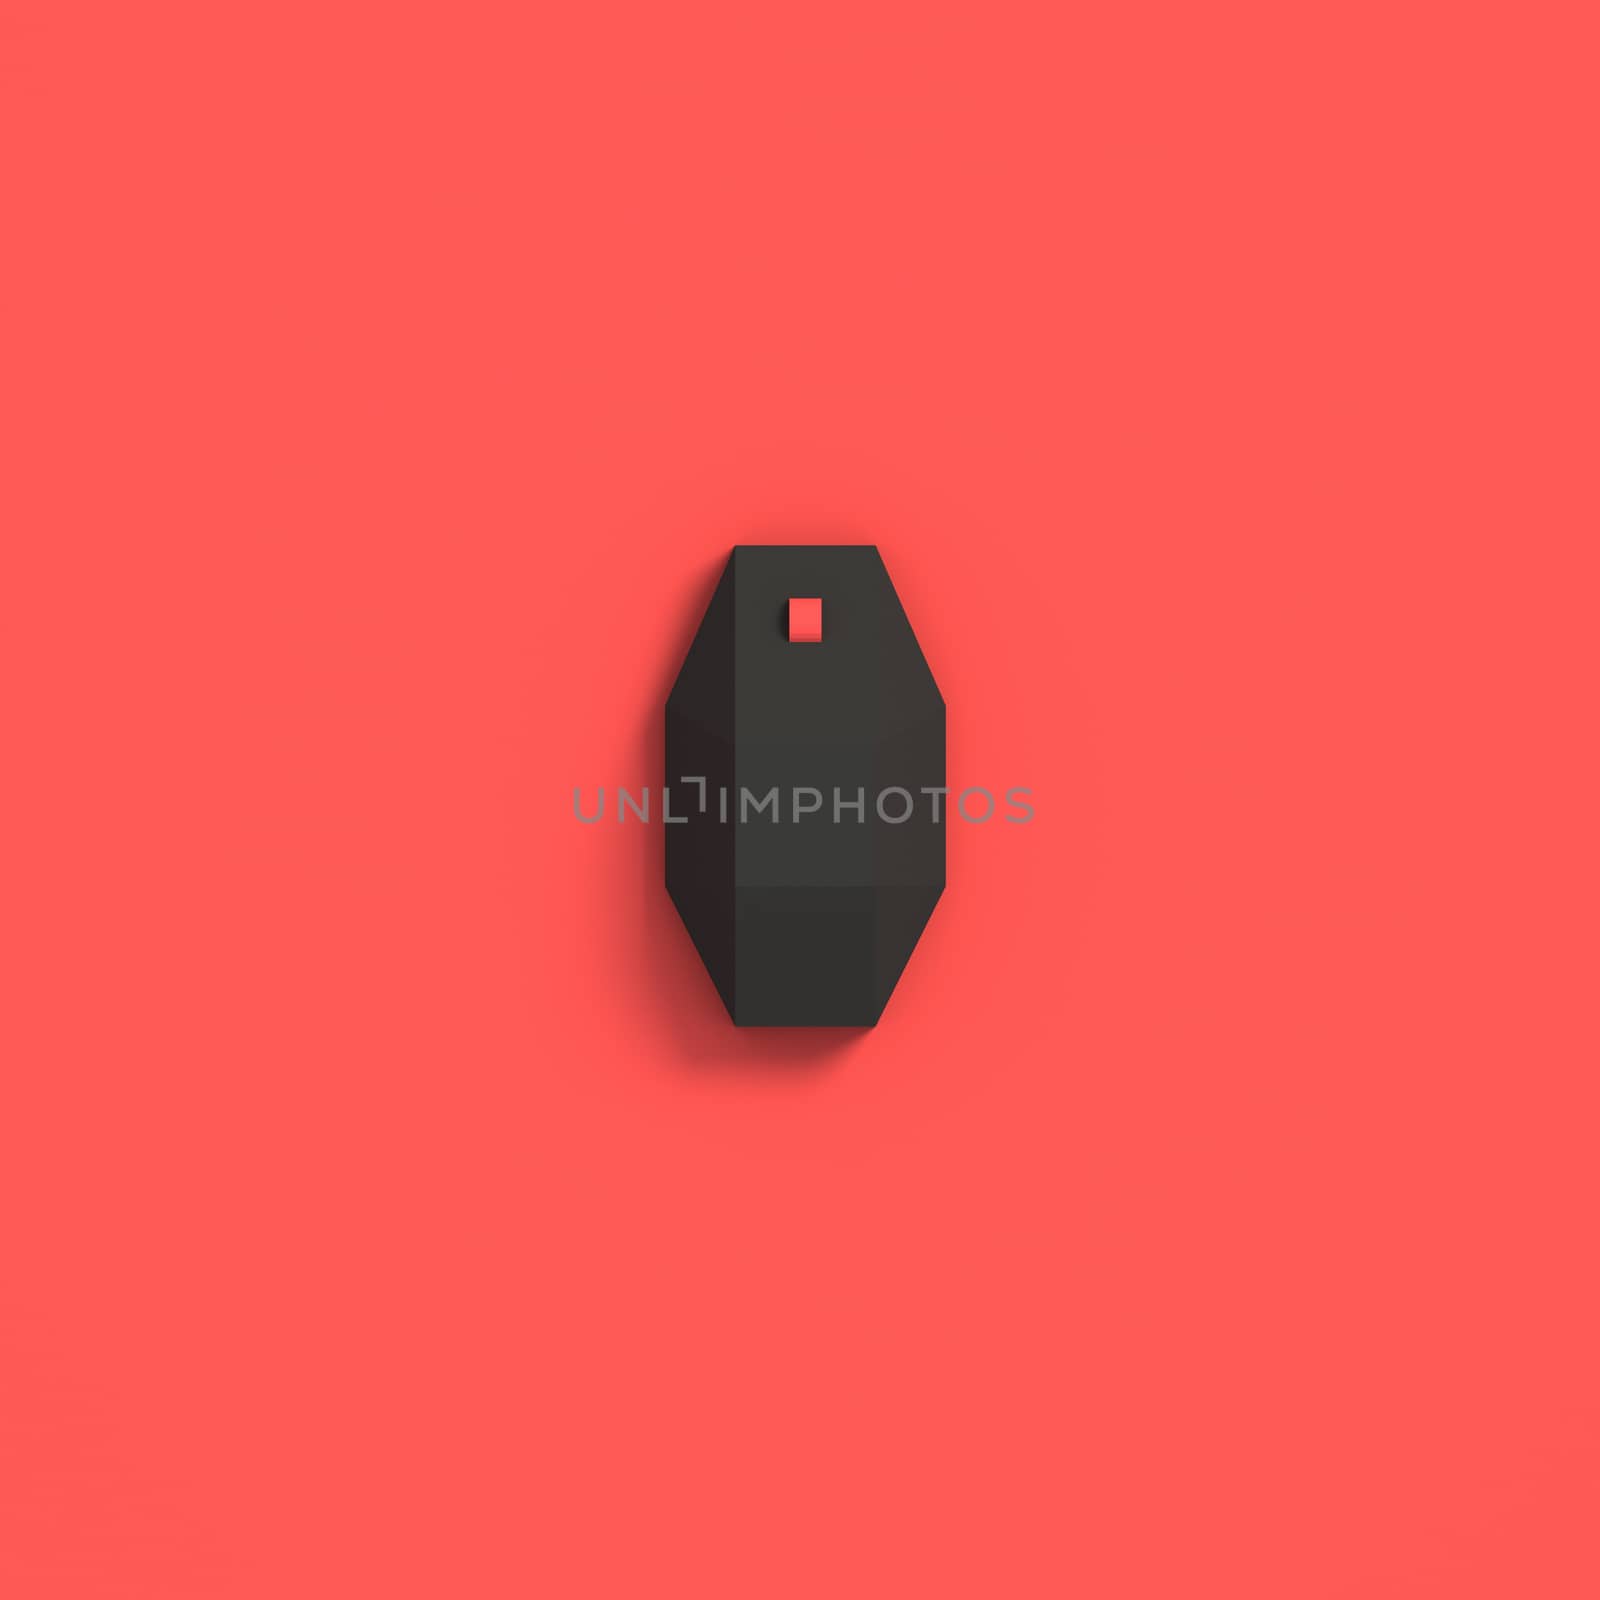 3D RENDERING OF COMPUTER MOUSE FROM TOP VIEW by PrettyTG